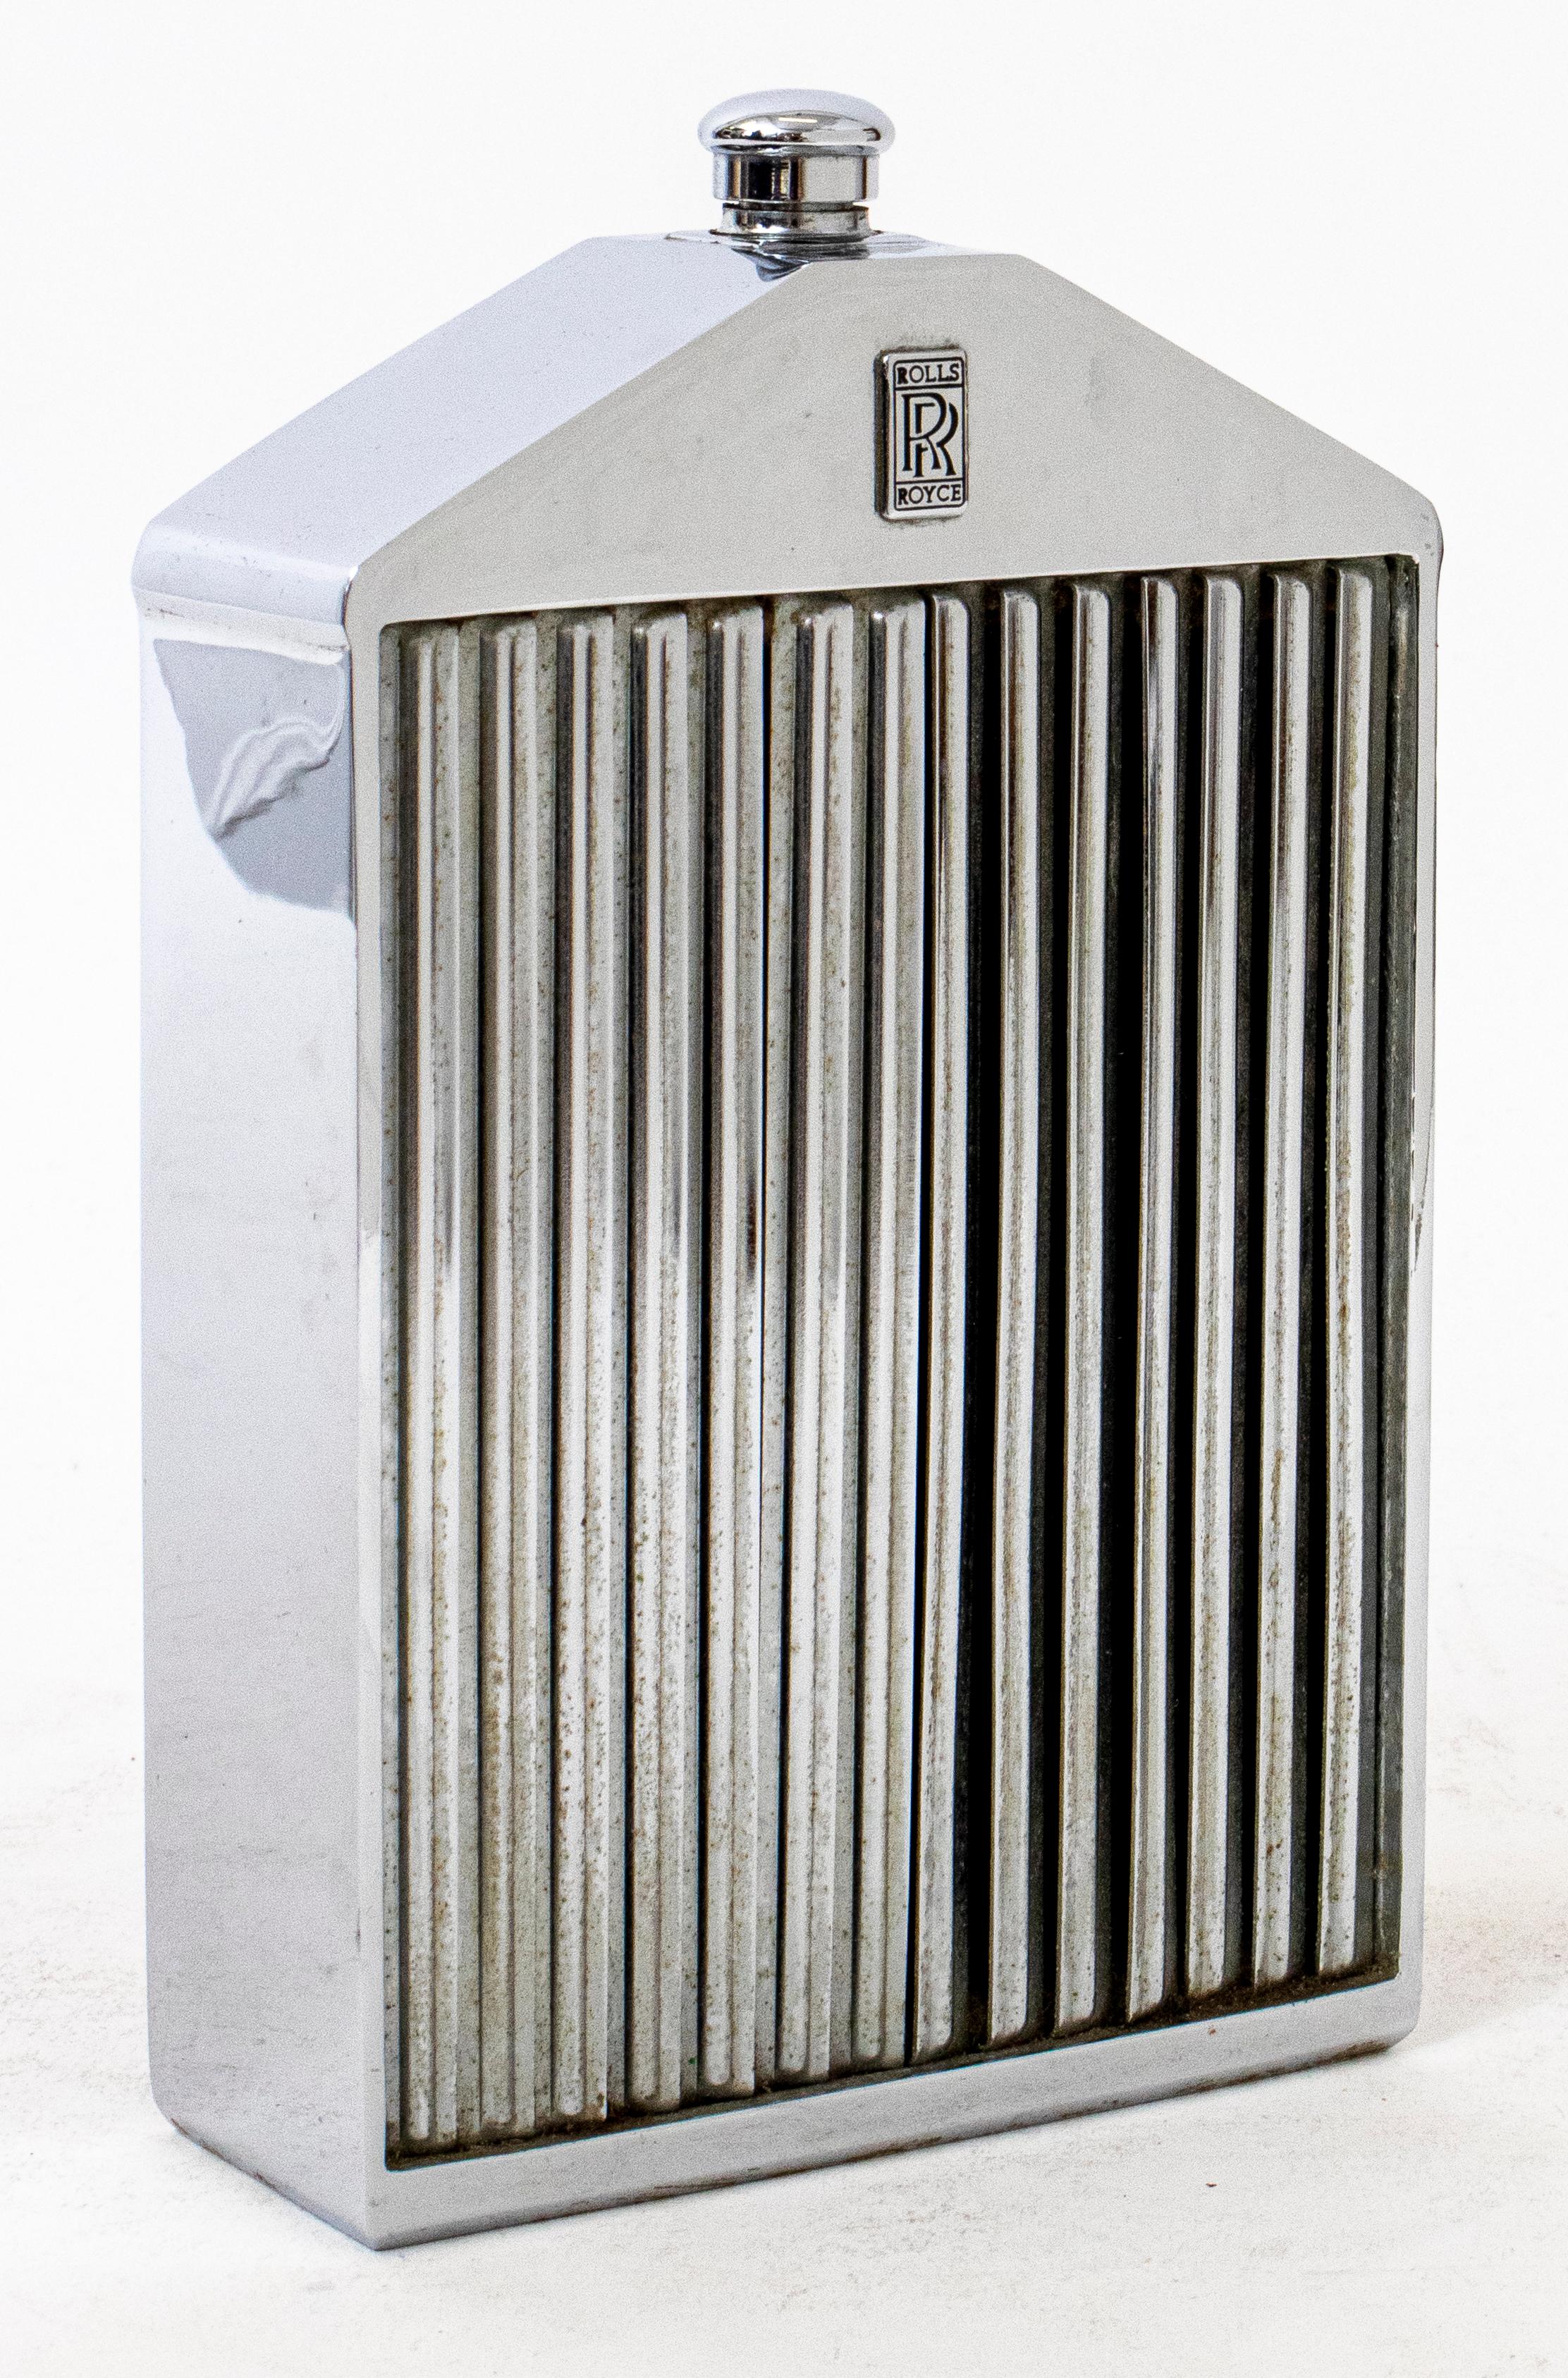 Mid-Century Modern Mid-Century Chrome Plate over Rolls Royce Radiator Grill with Decanter